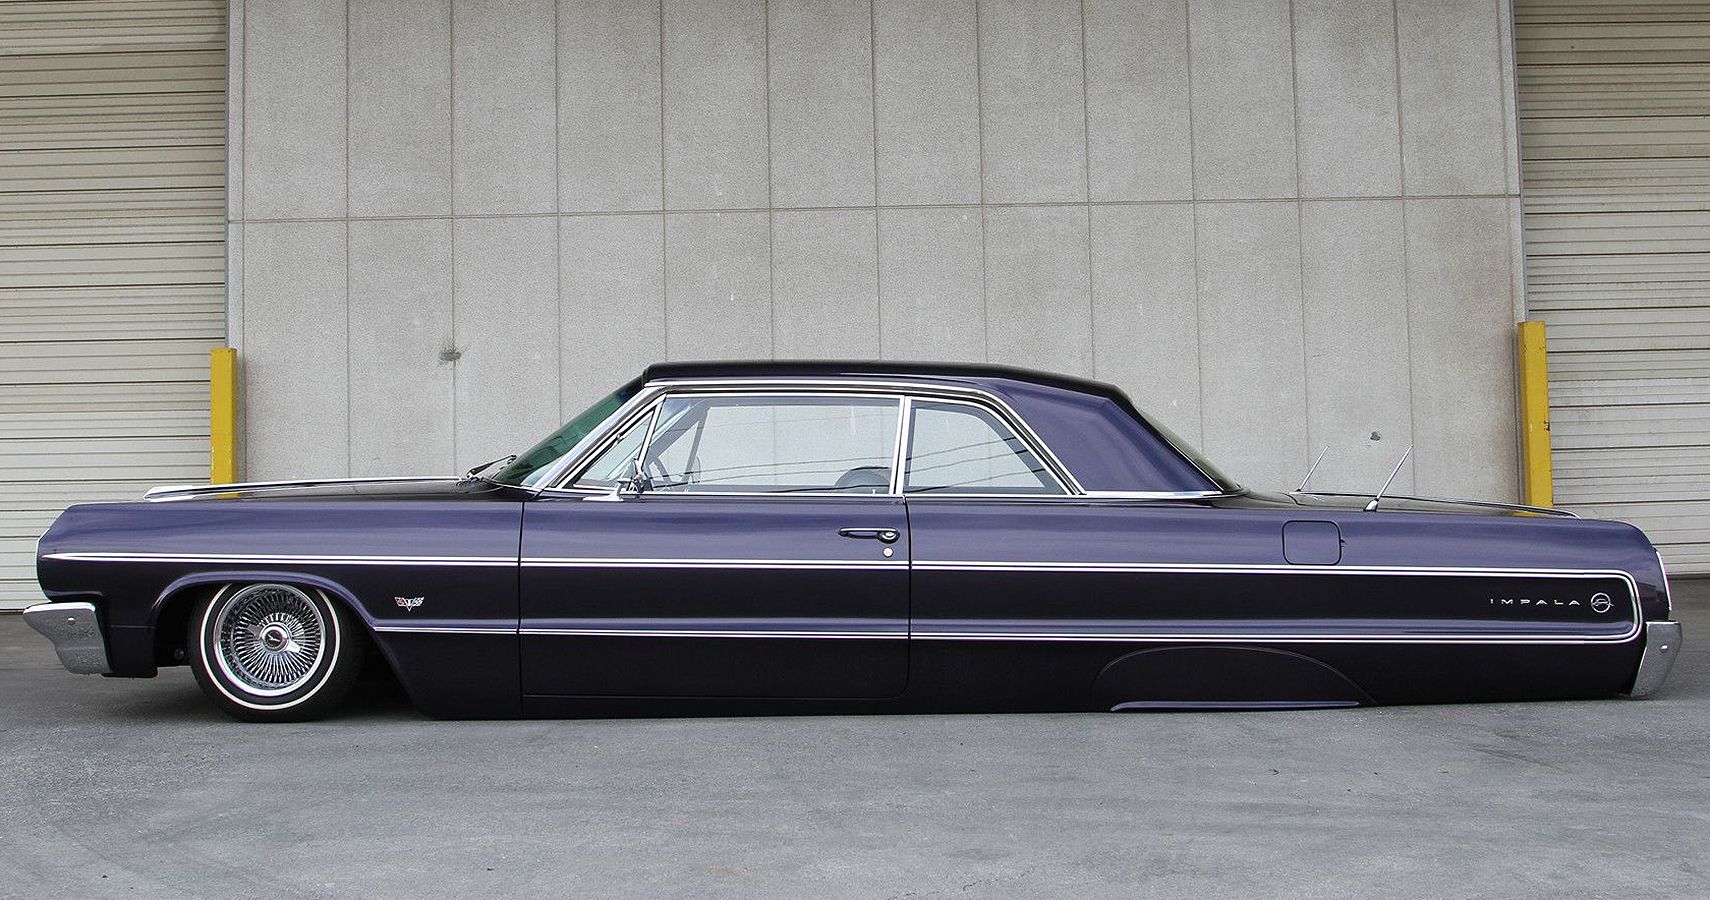 1964 Chevy Impala: The Horizon Is the Limit?